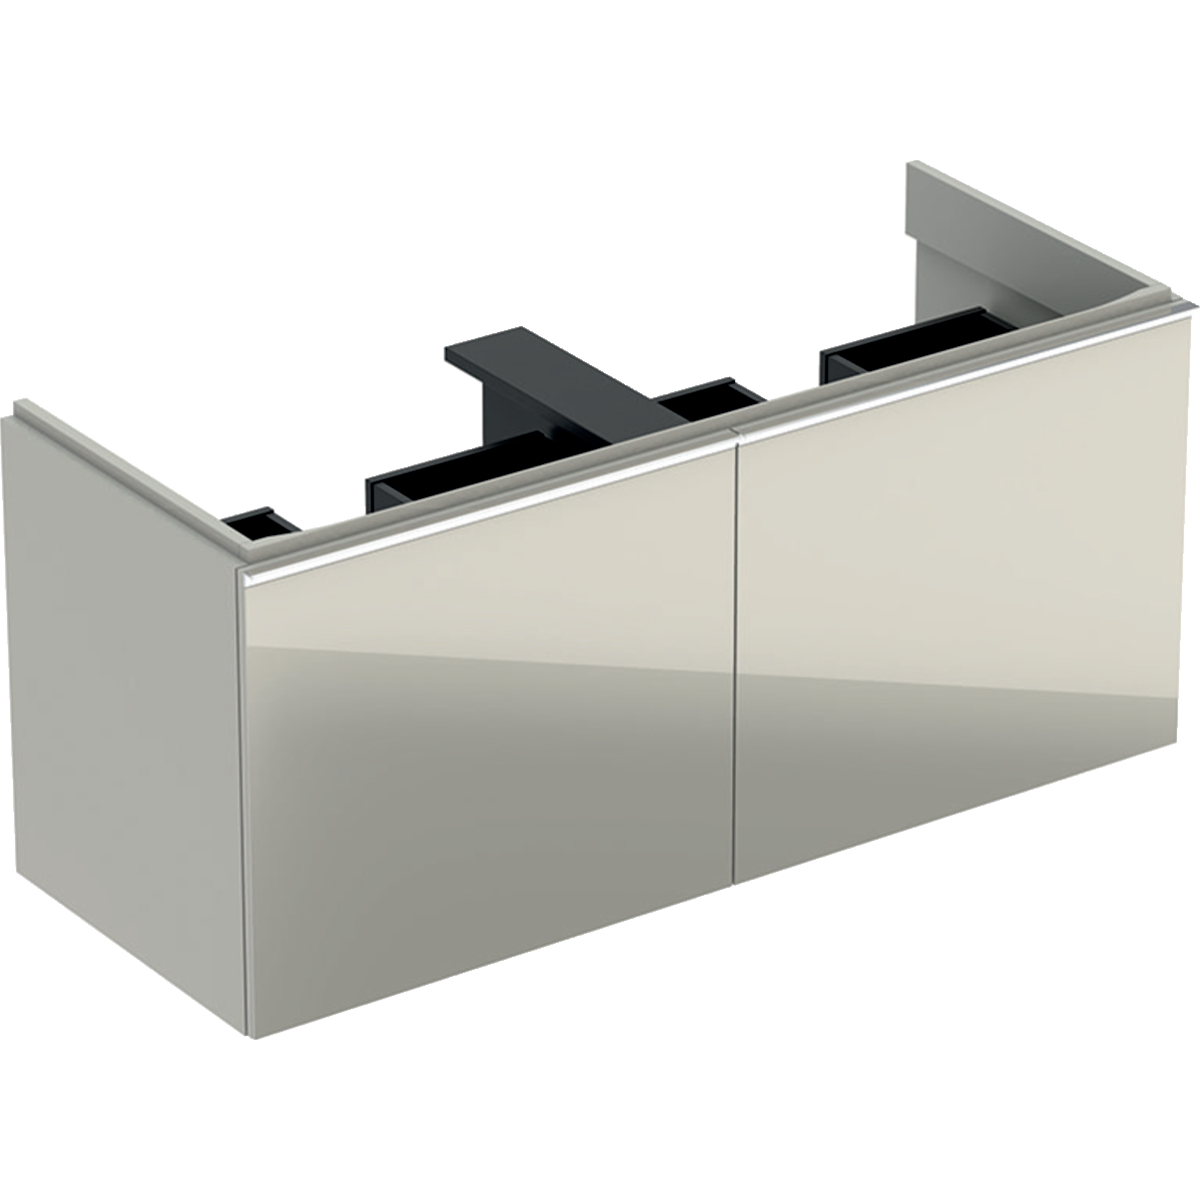 Geberit 500613JL2 Acanto 1190mm Vanity Unit for Double Basin with Drawers - Sand (BASIN NOT INCLUDED)